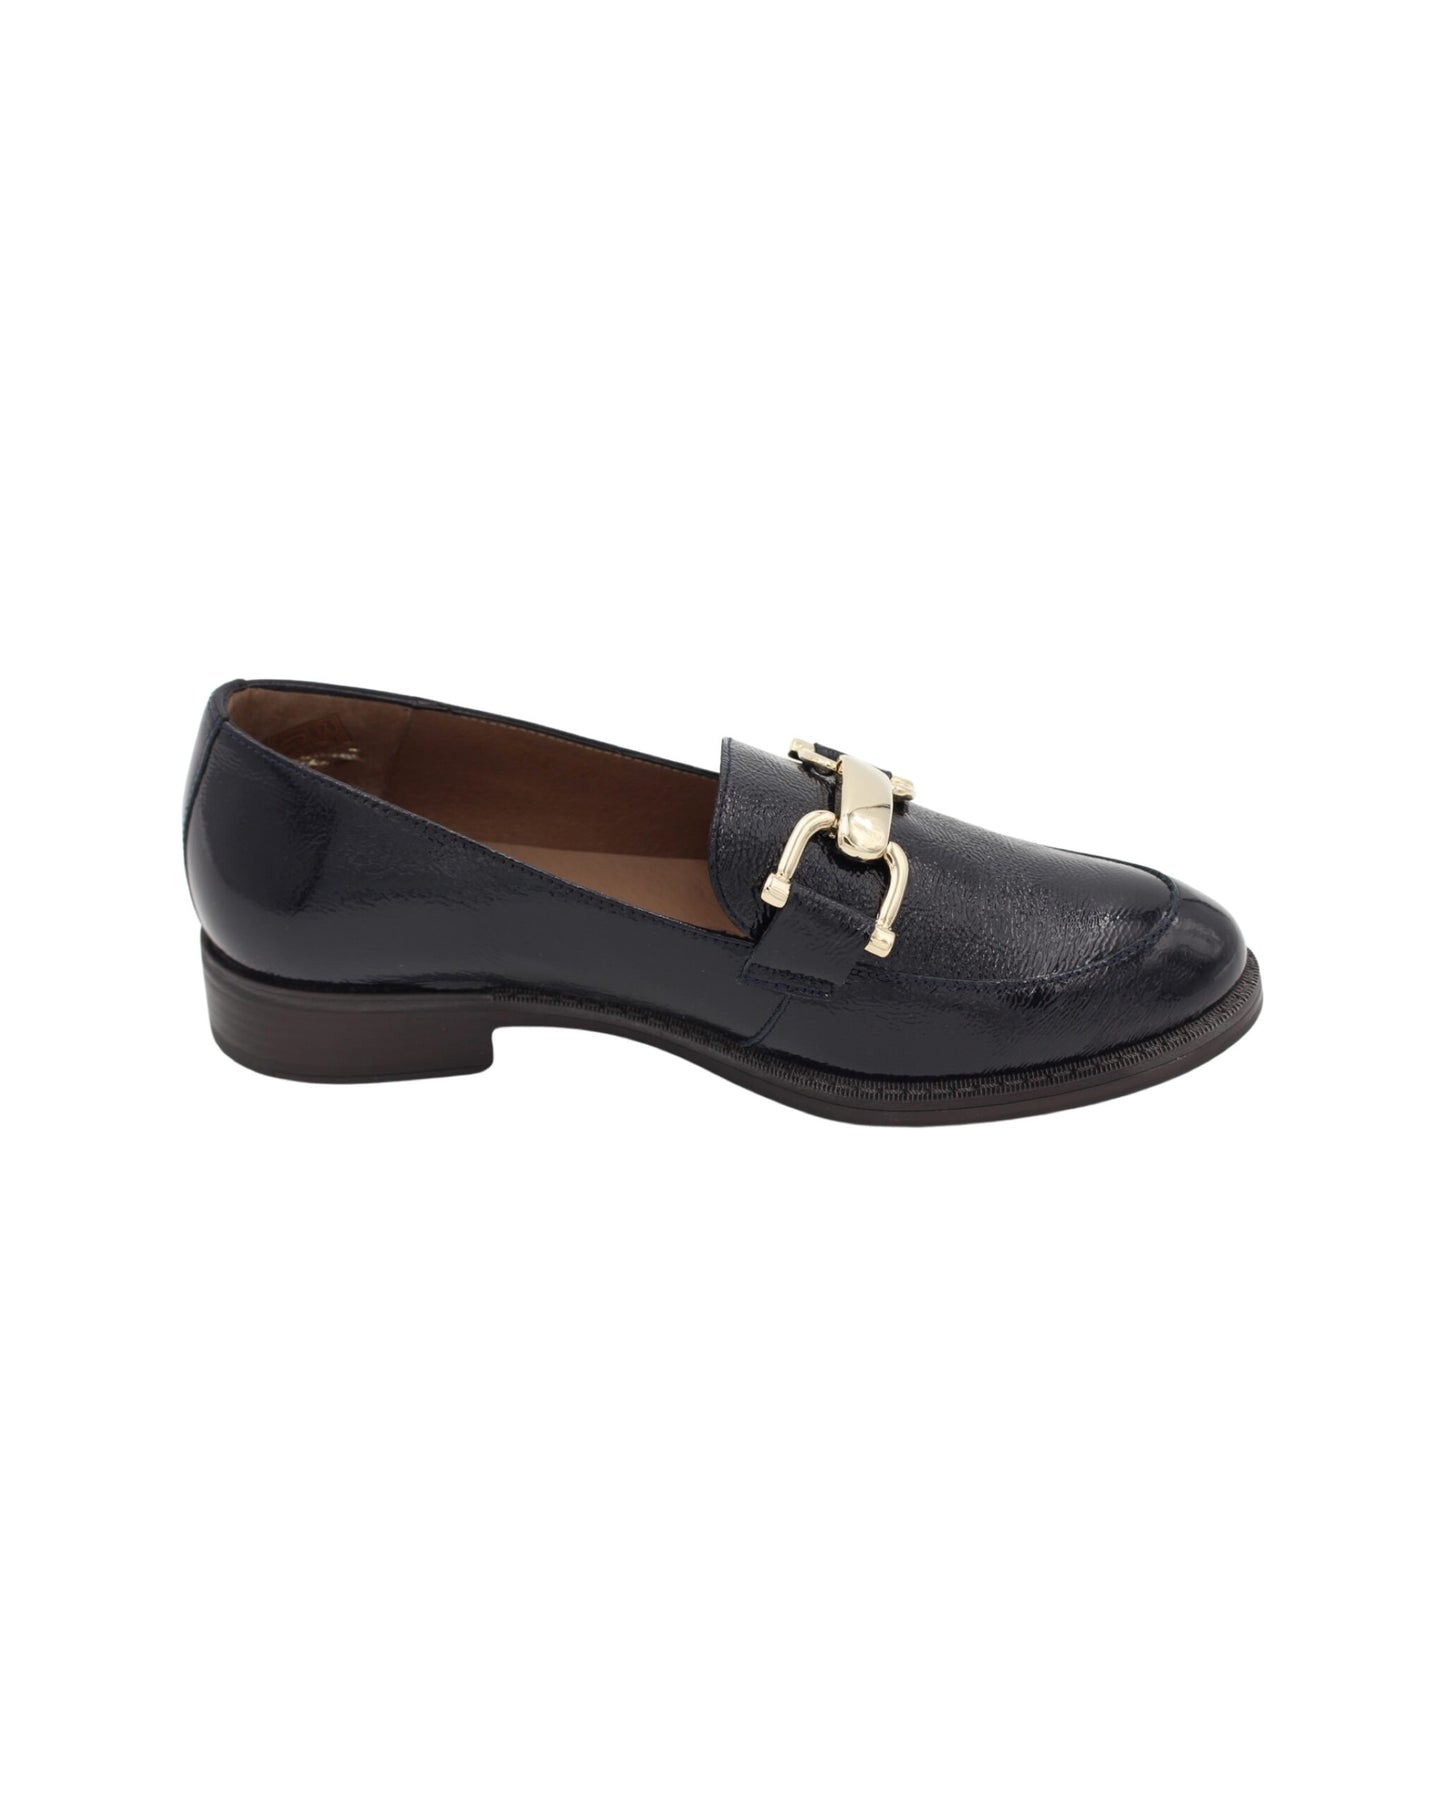 Wonders Loafers  Navy Patent